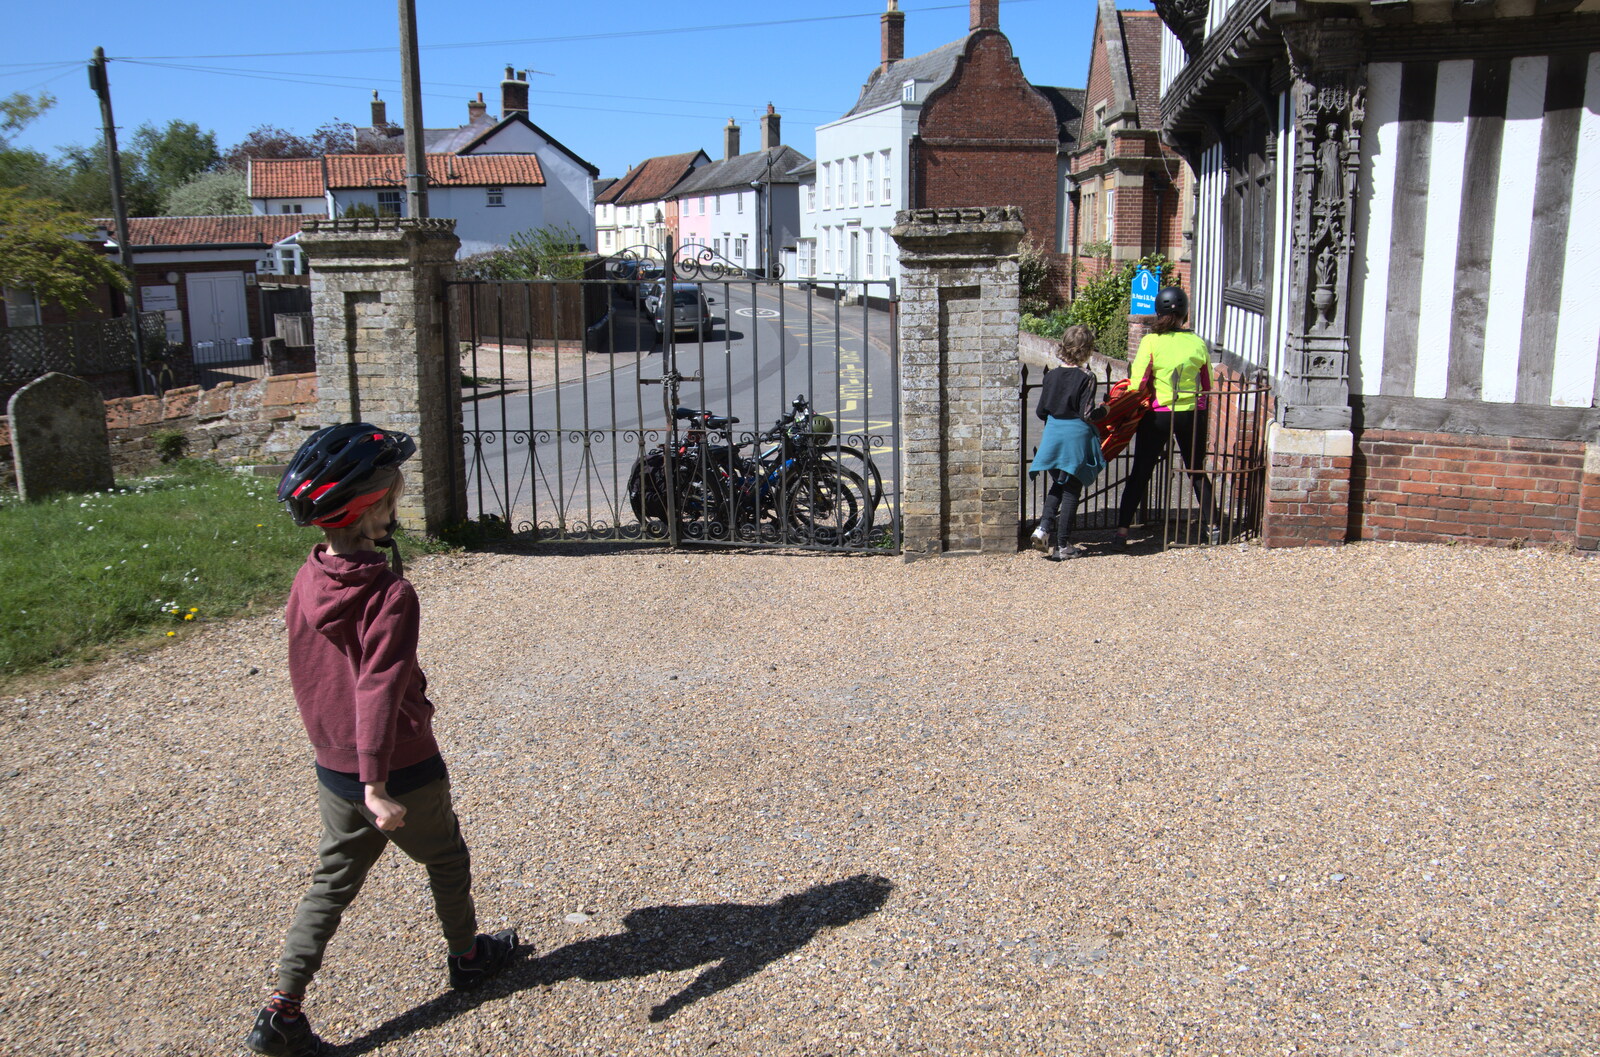 Harry roams around from The Lockdown Desertion of Diss, and a Bike Ride up the Avenue, Brome - 19th April 2020